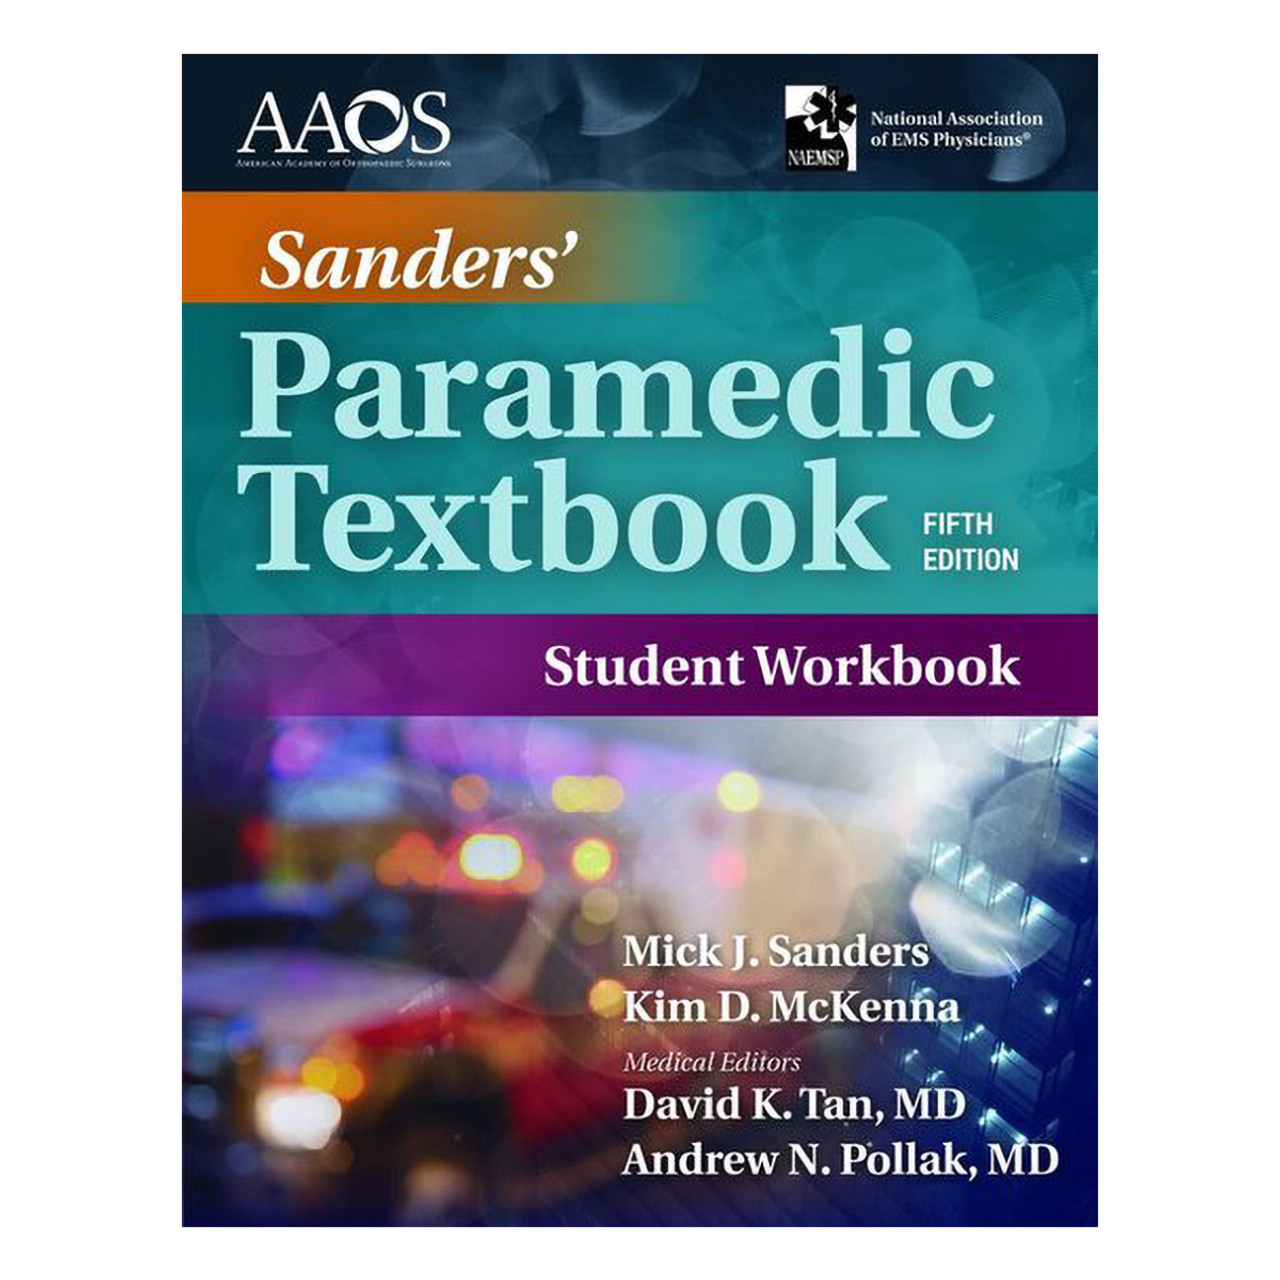 Heroes　Sanders'　Curtis　Tools　Paramedic　Textbook,　5th　Workbook　Edition　Student　for